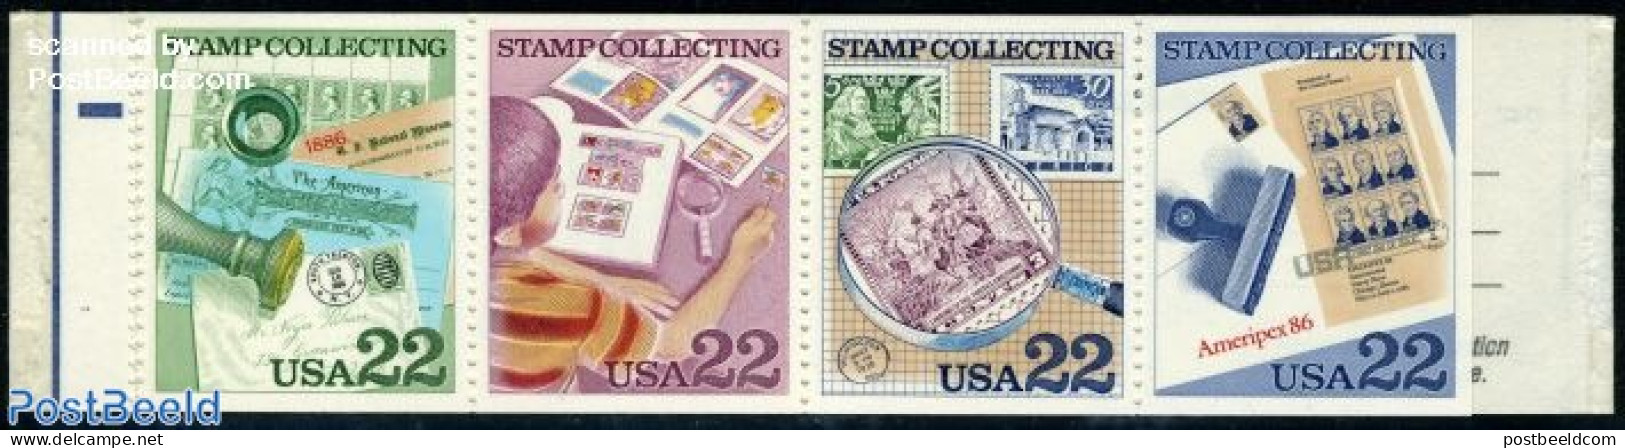 United States Of America 1986 Ameripex Booklet, Mint NH, Philately - Stamp Booklets - Stamps On Stamps - Neufs